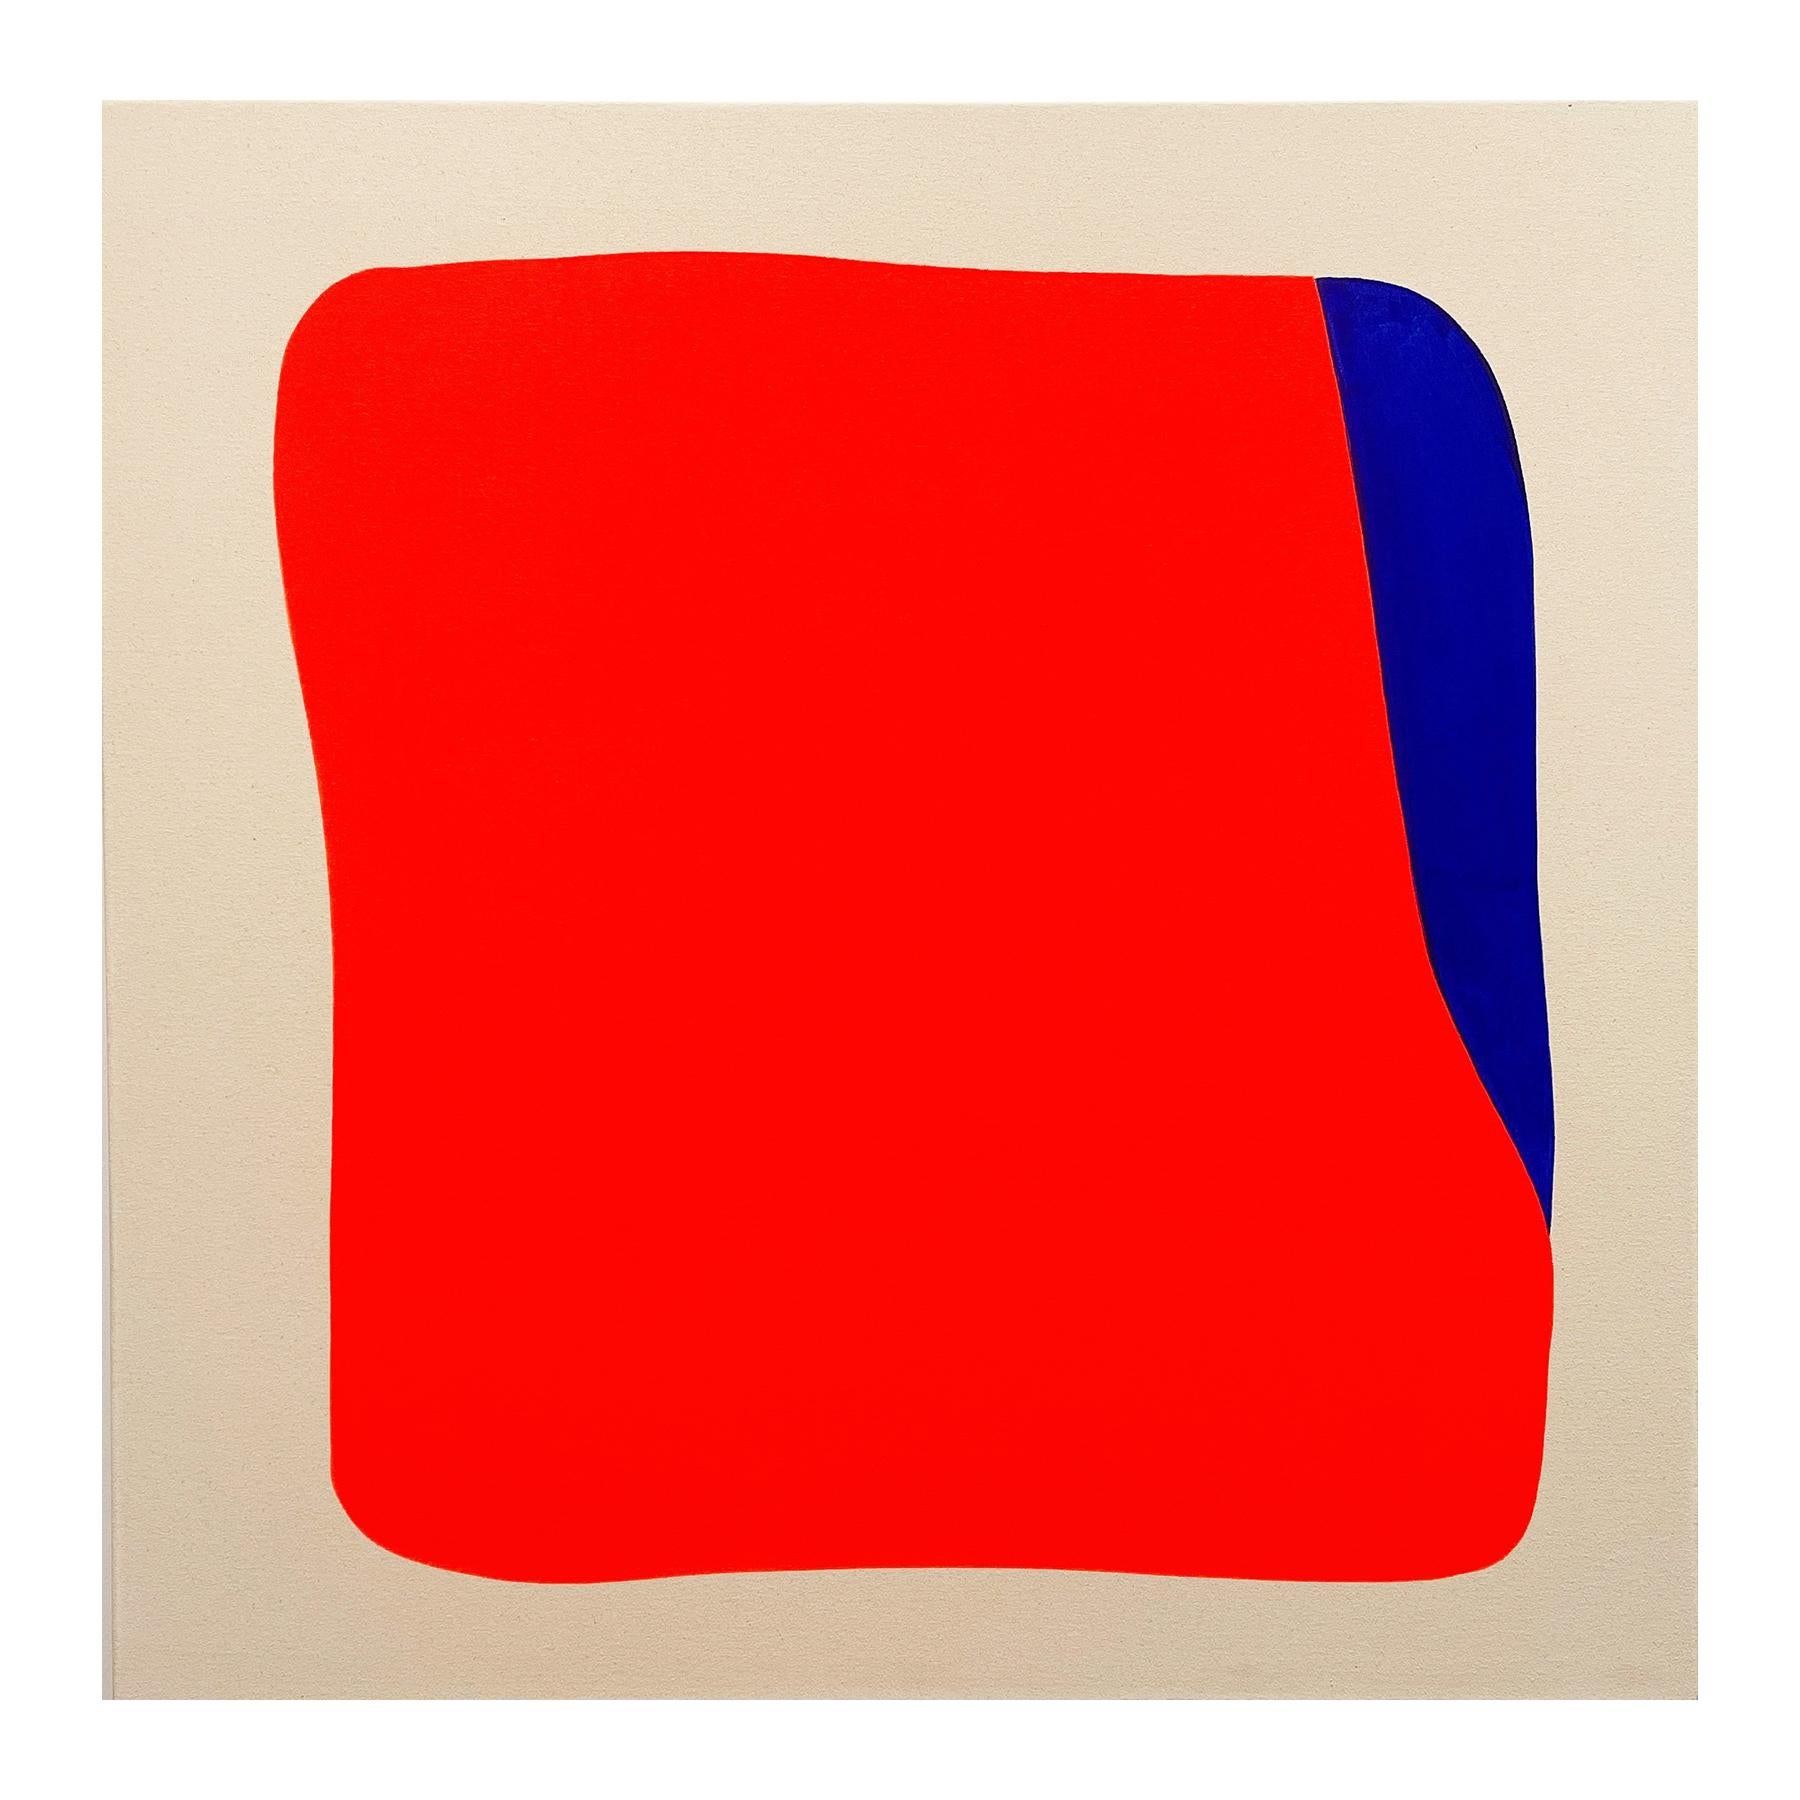 Contemporary geometric abstract painting by Houston-based artist Gary Griffin. The work features an orange and blue rounded-edge square shape set against an off-white background. Signed and titled on the reverse. Recently featured in 